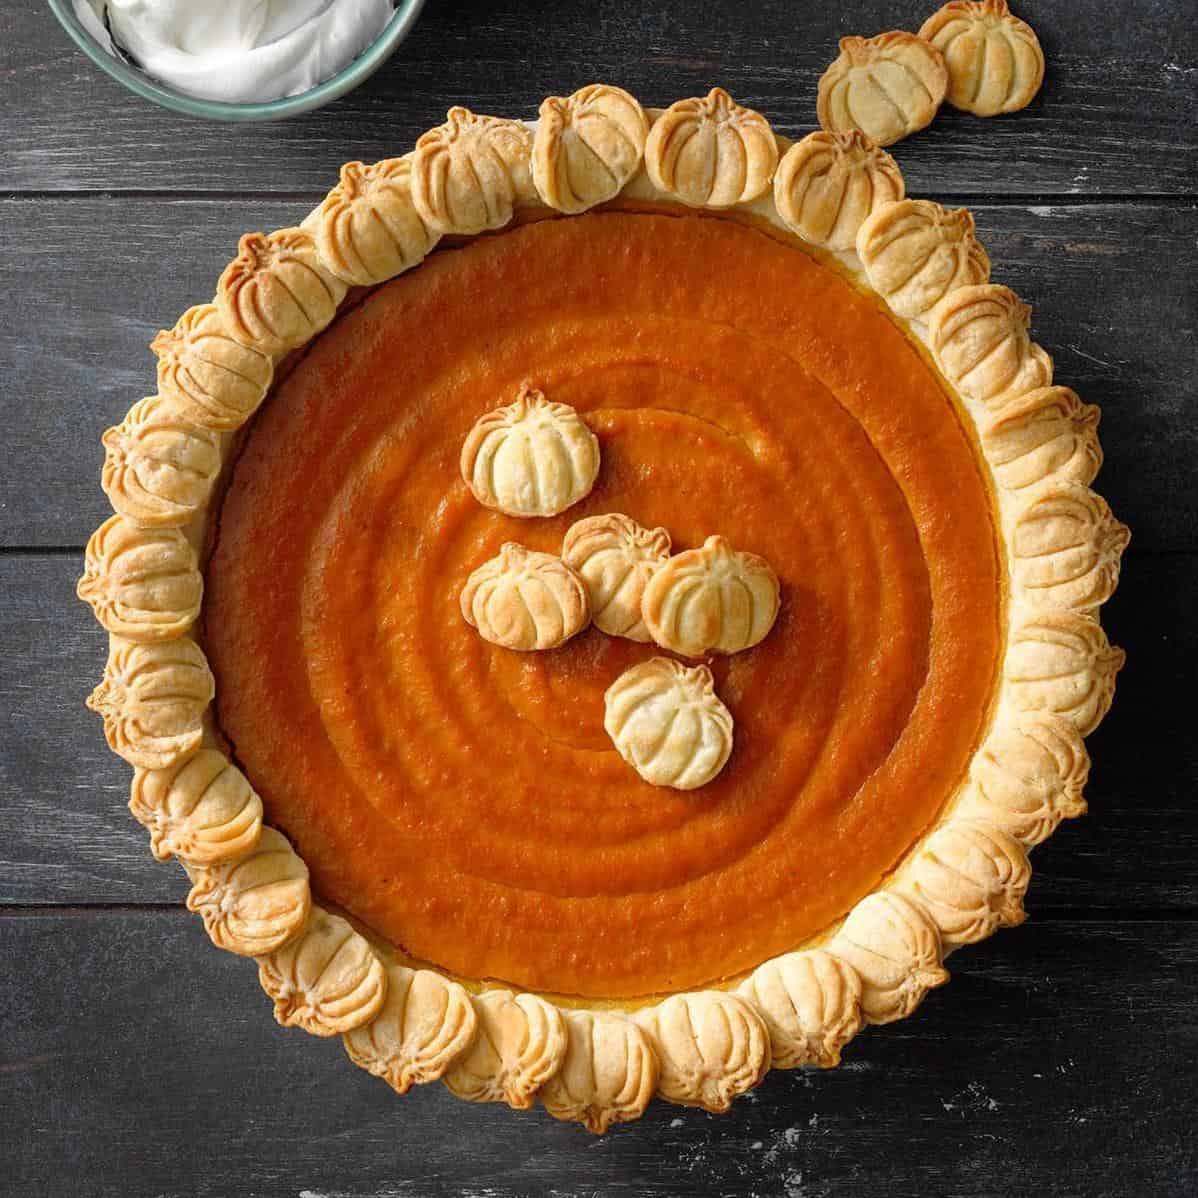  Nothing says fall like a good old-fashioned pumpkin pie!